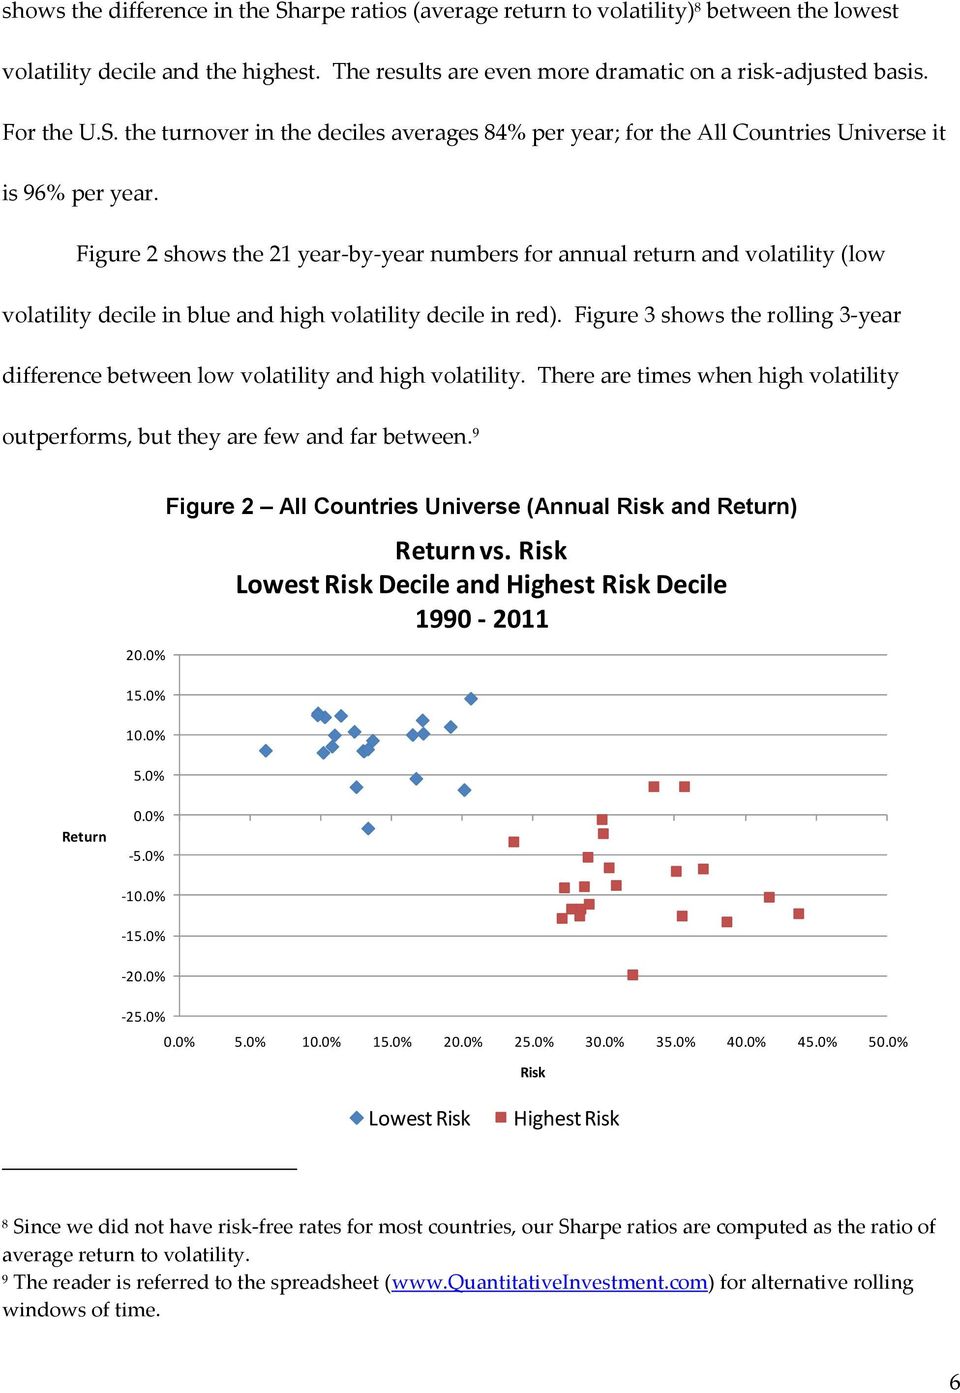 Figure 2 shows the 21 year-by-year numbers for annual return and volatility (low volatility decile in blue and high volatility decile in red).